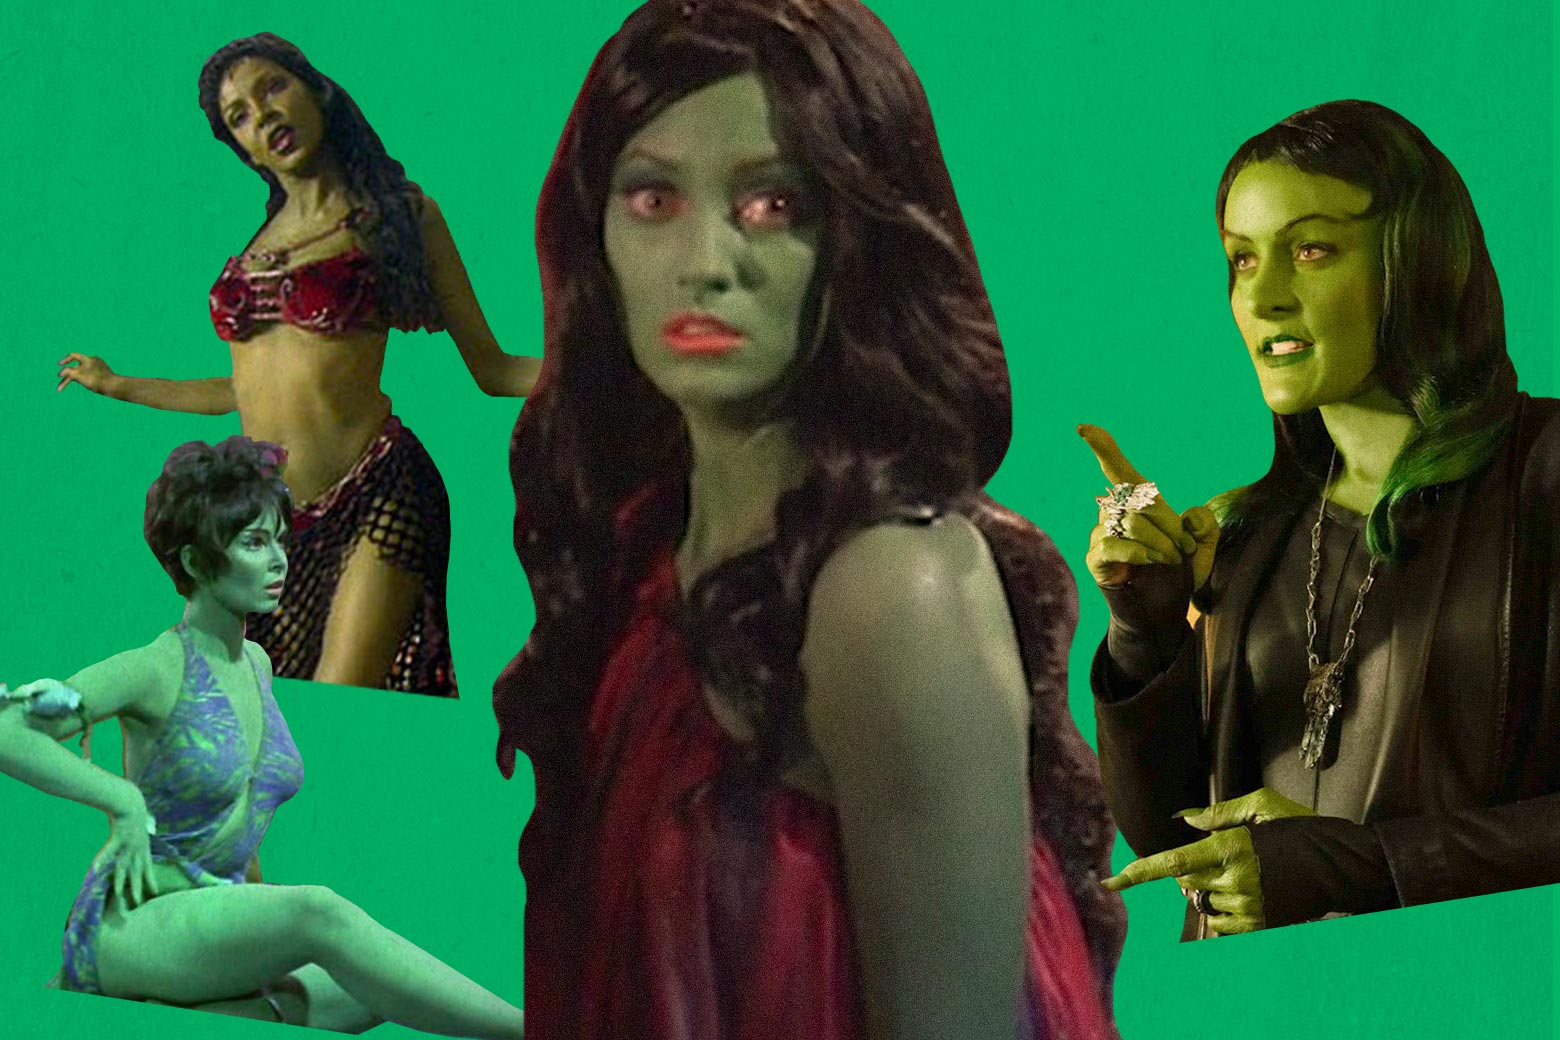 Janet Kidder as Osyraa, Yvonne Craig as Marta, Orion Slave Girls, and Star Trek Continues Lolani, a victim of the Orion slave trade.